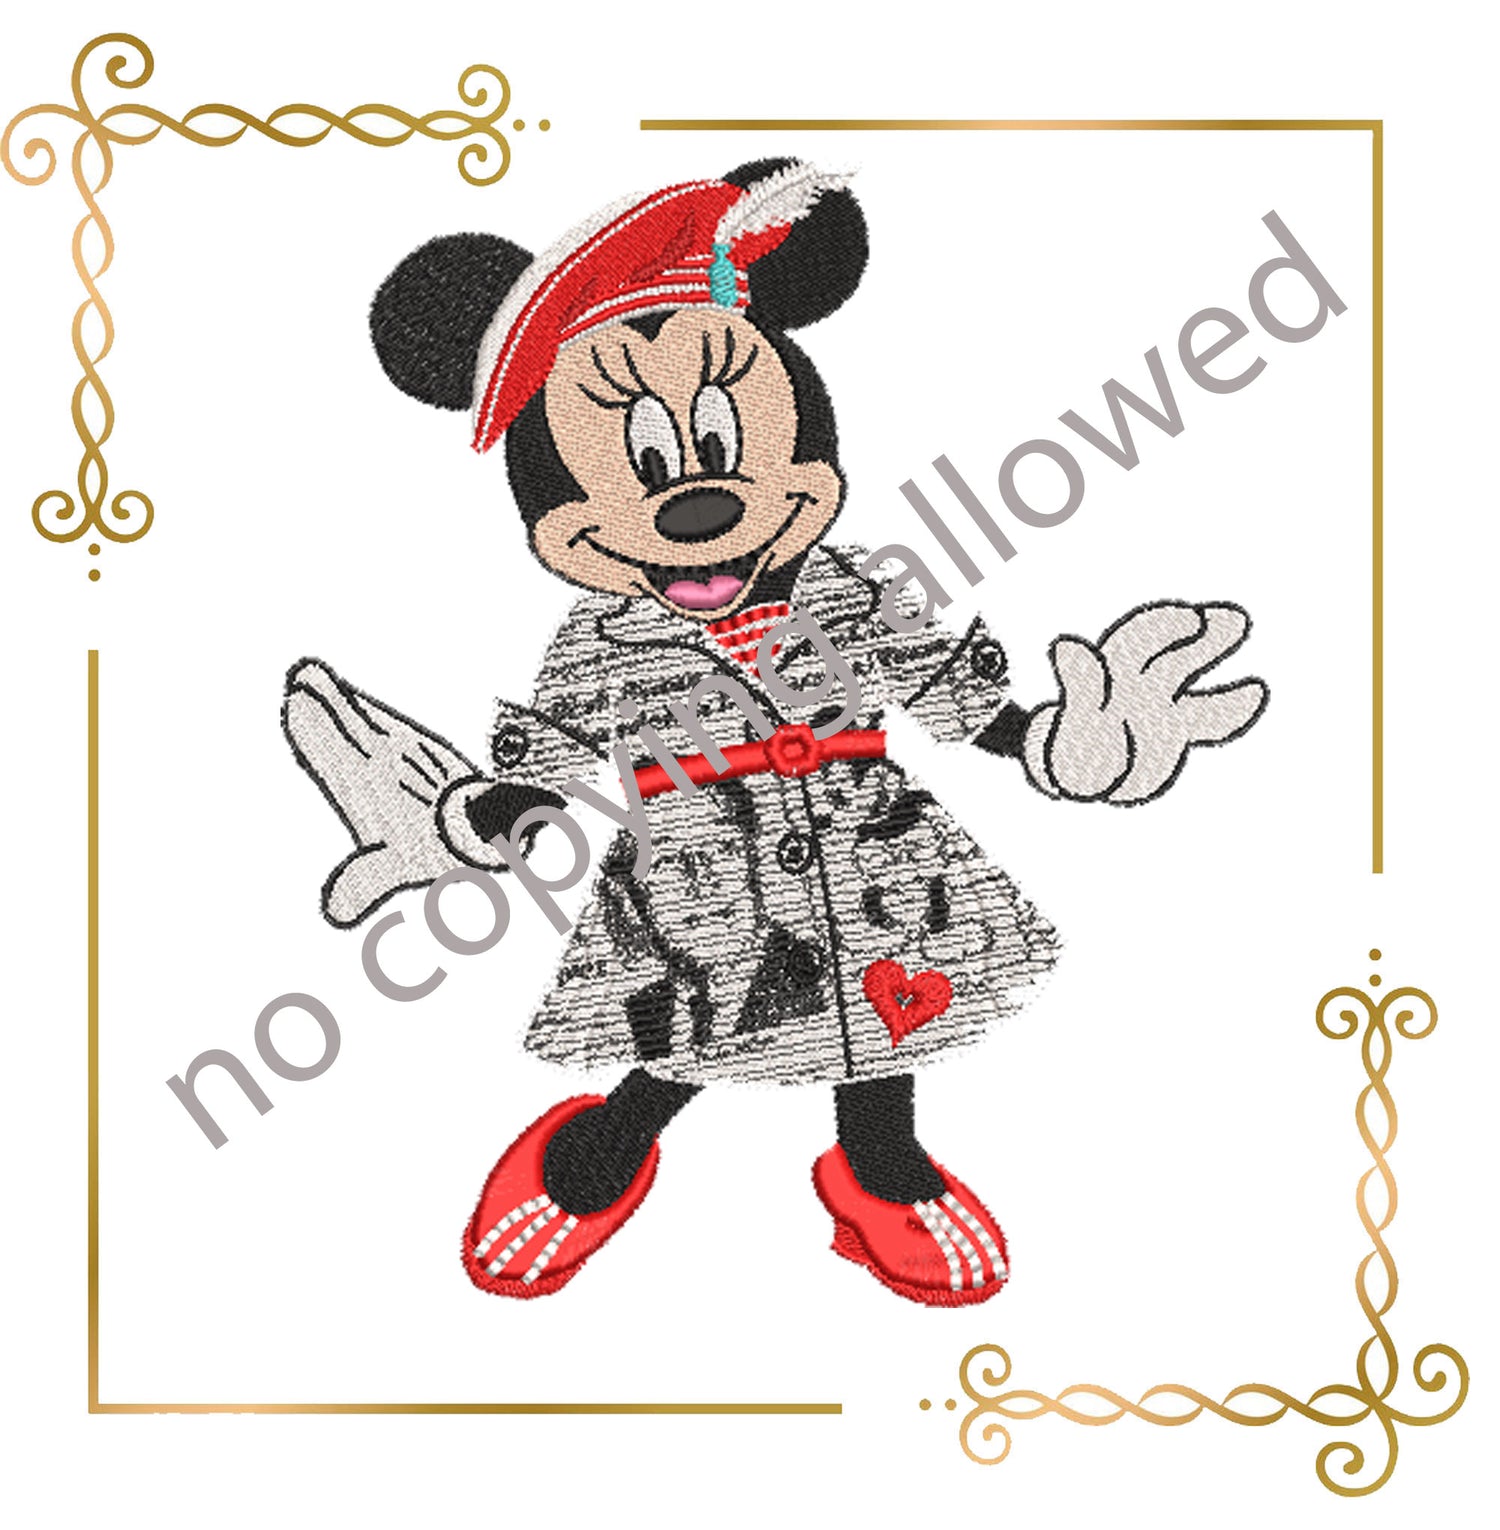 Minnie Mouse in beret and dress newspaper, poet digital embroidery design